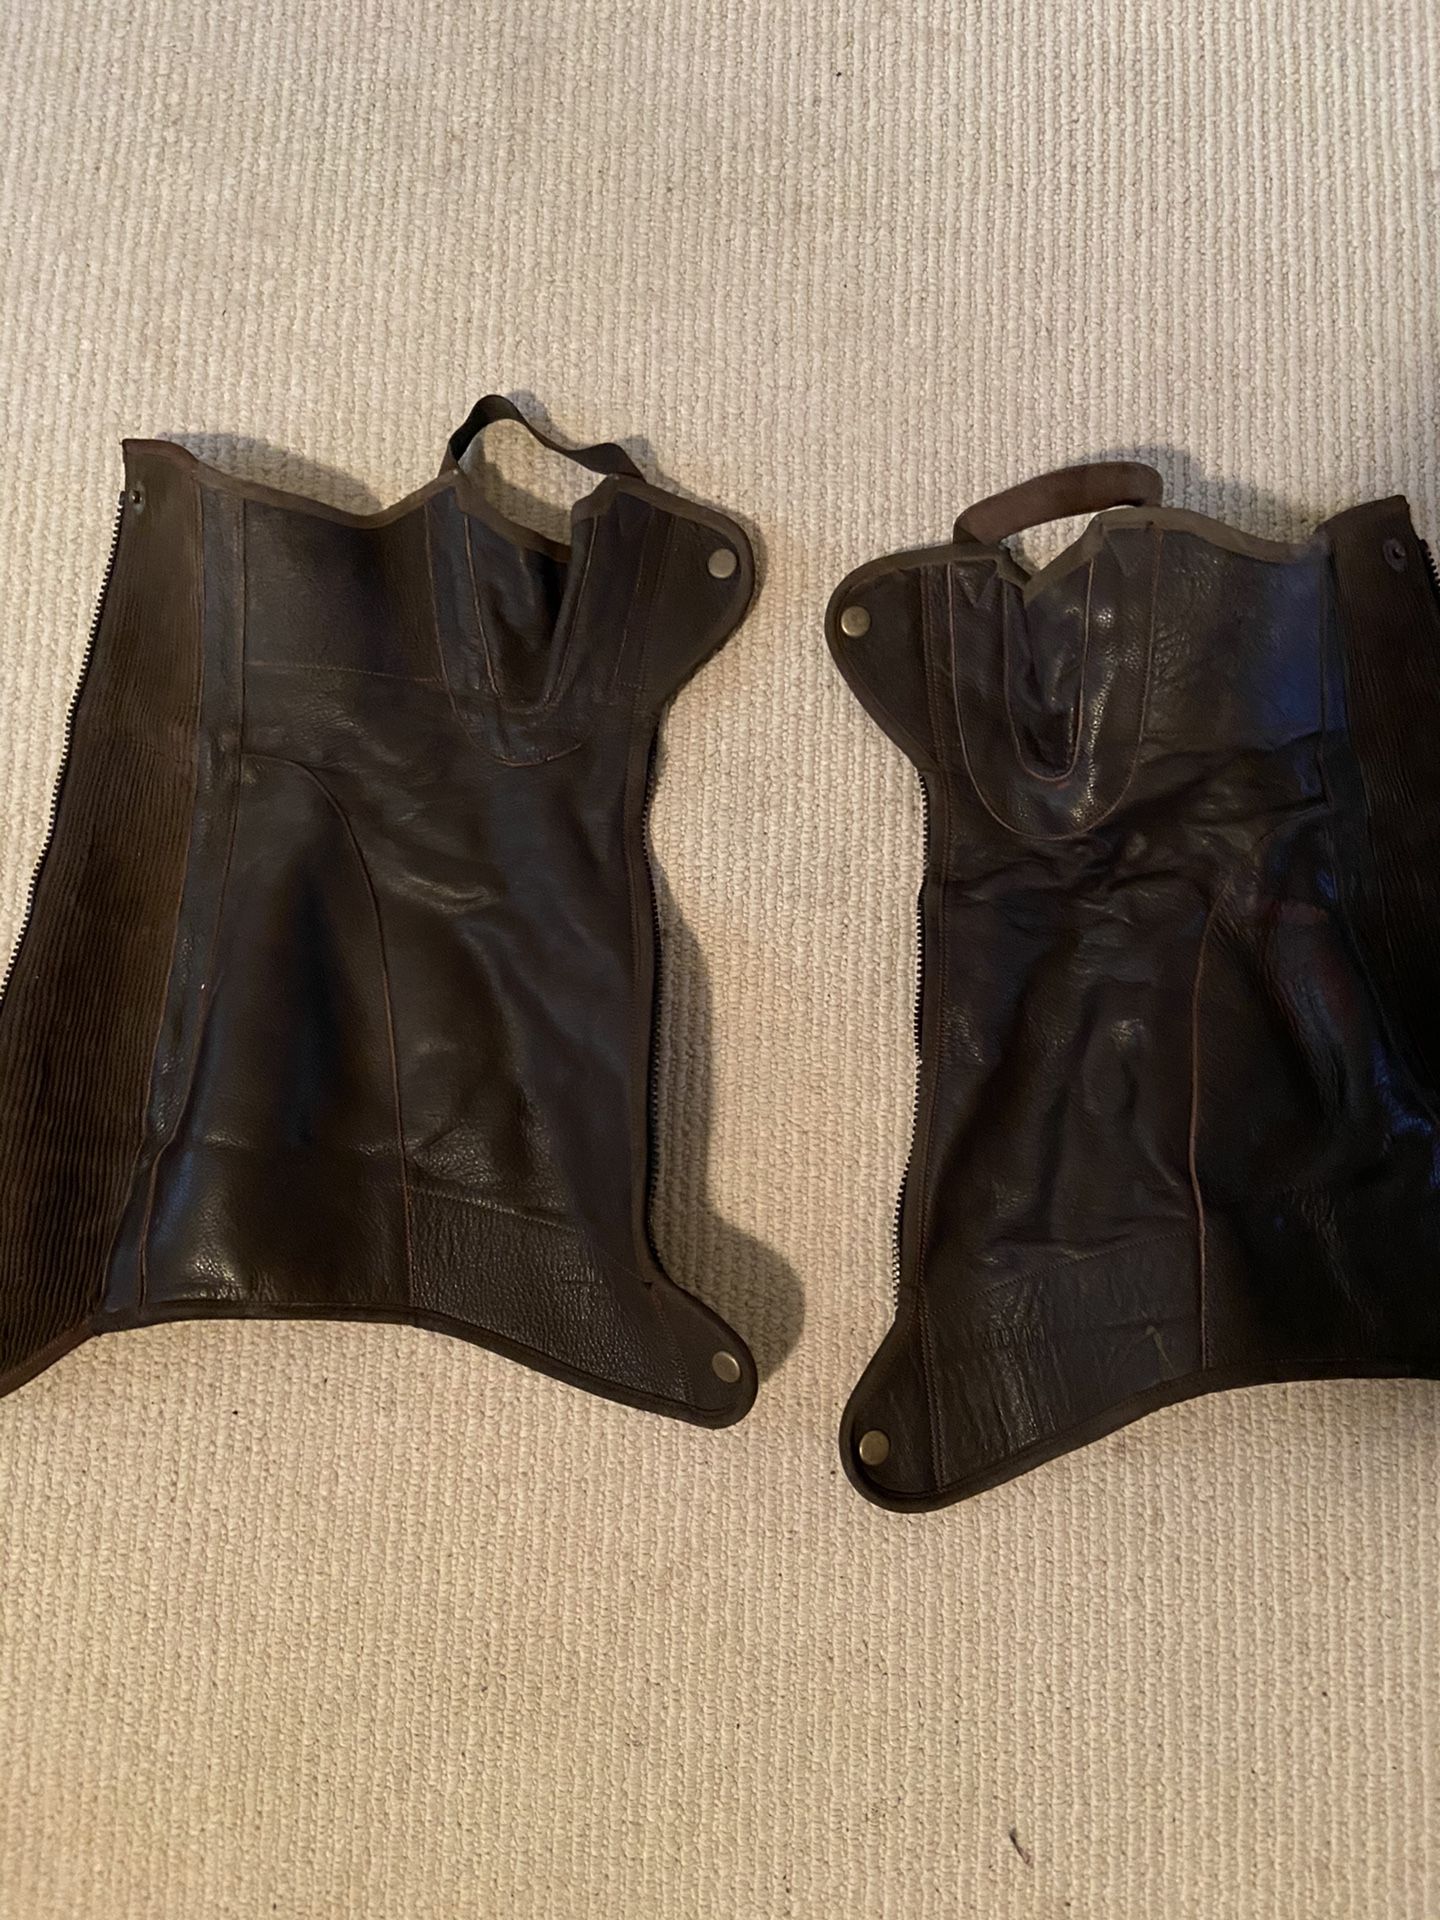 Used Leather Equestrian Half Chaps